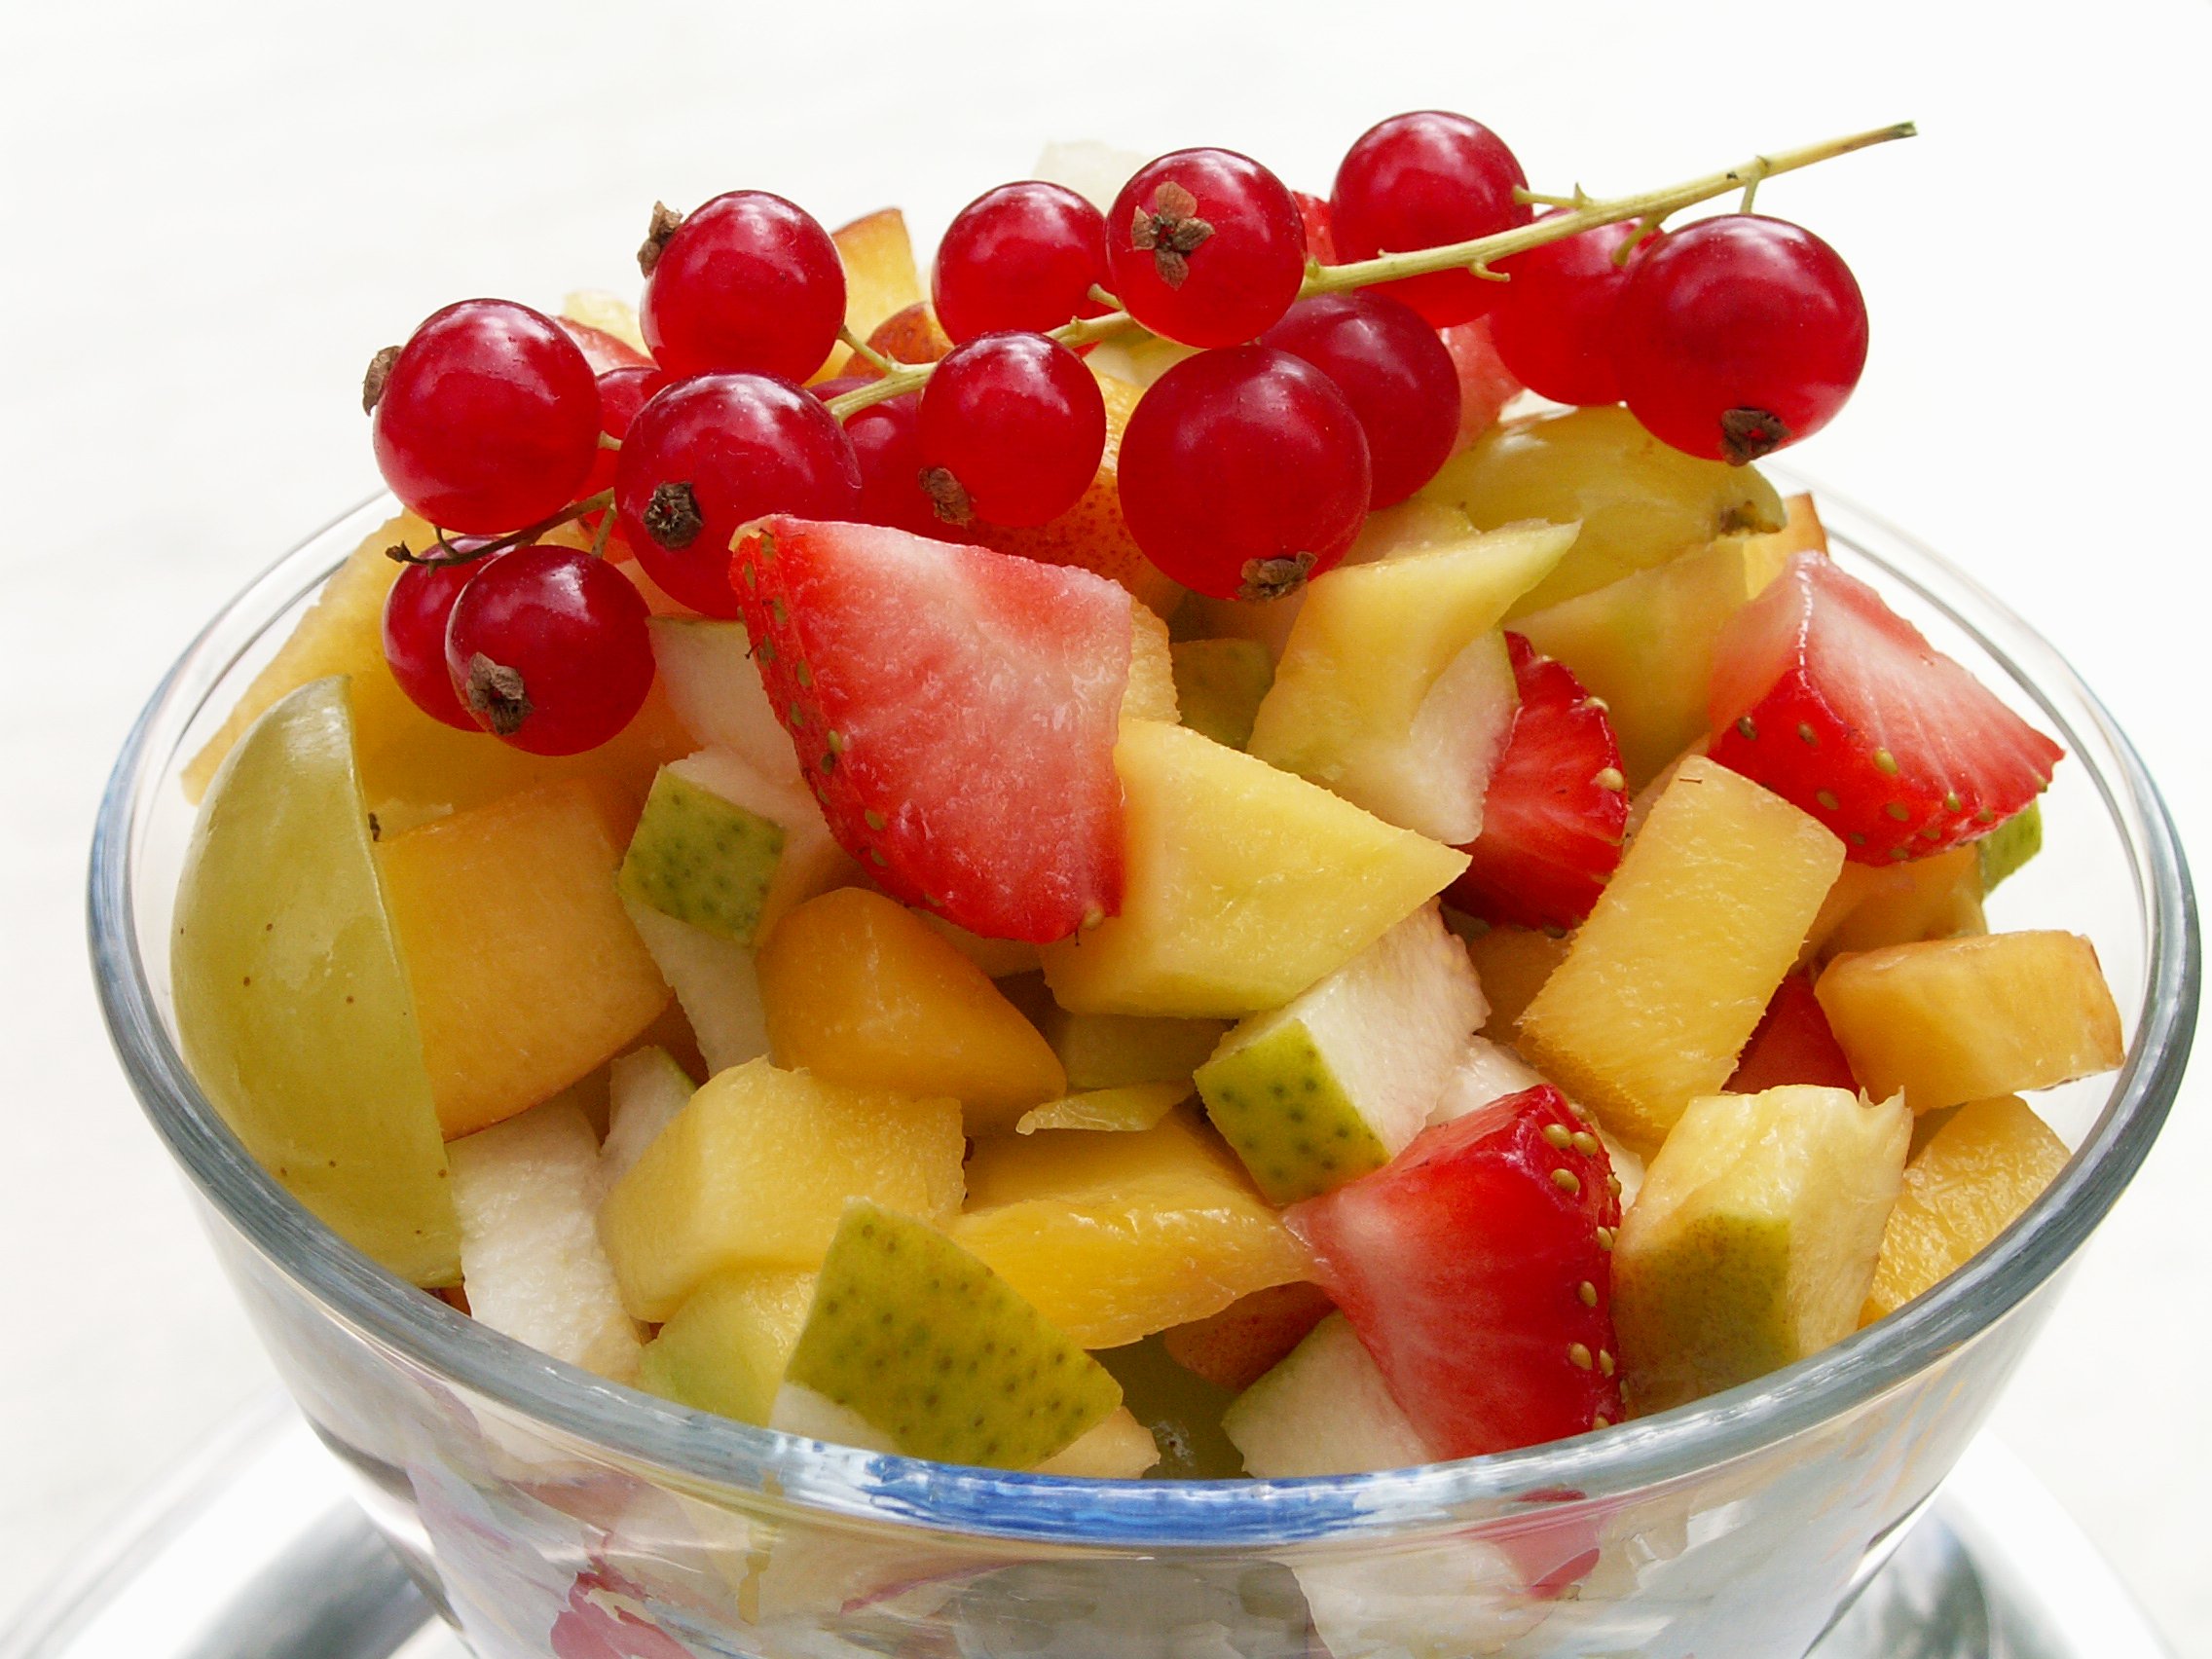 On the picture you can see a cup. In the cup are different types of fruit. The fruit is cut into small pieces. That is fruit salad.